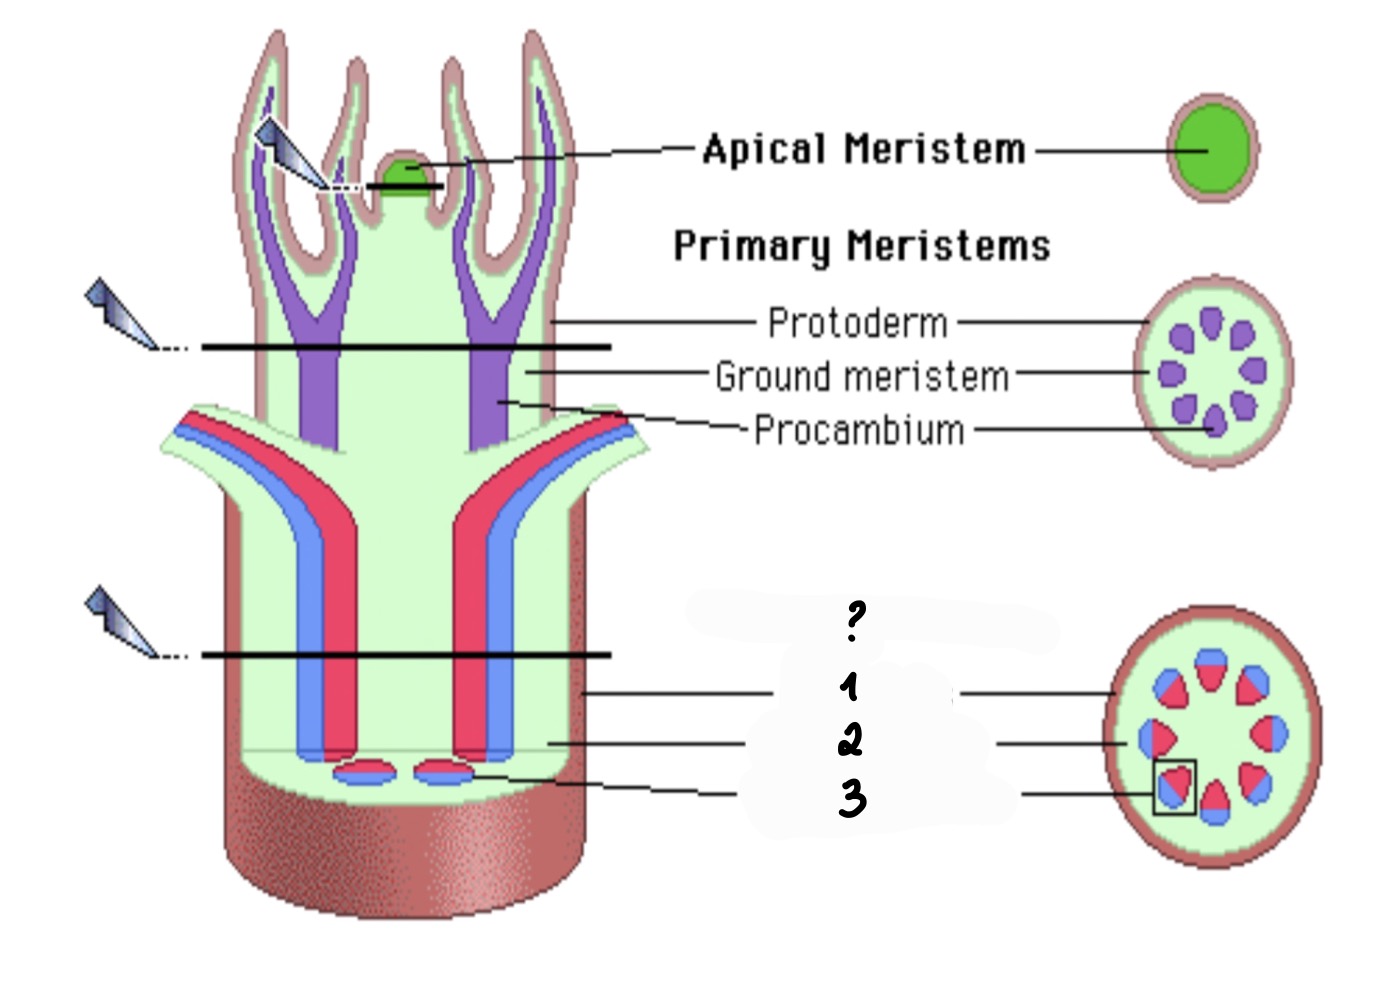 <p>• what the Primary meristem members will become (1) was Protoderm (2) was Ground Meristem (3) was Procambium</p>